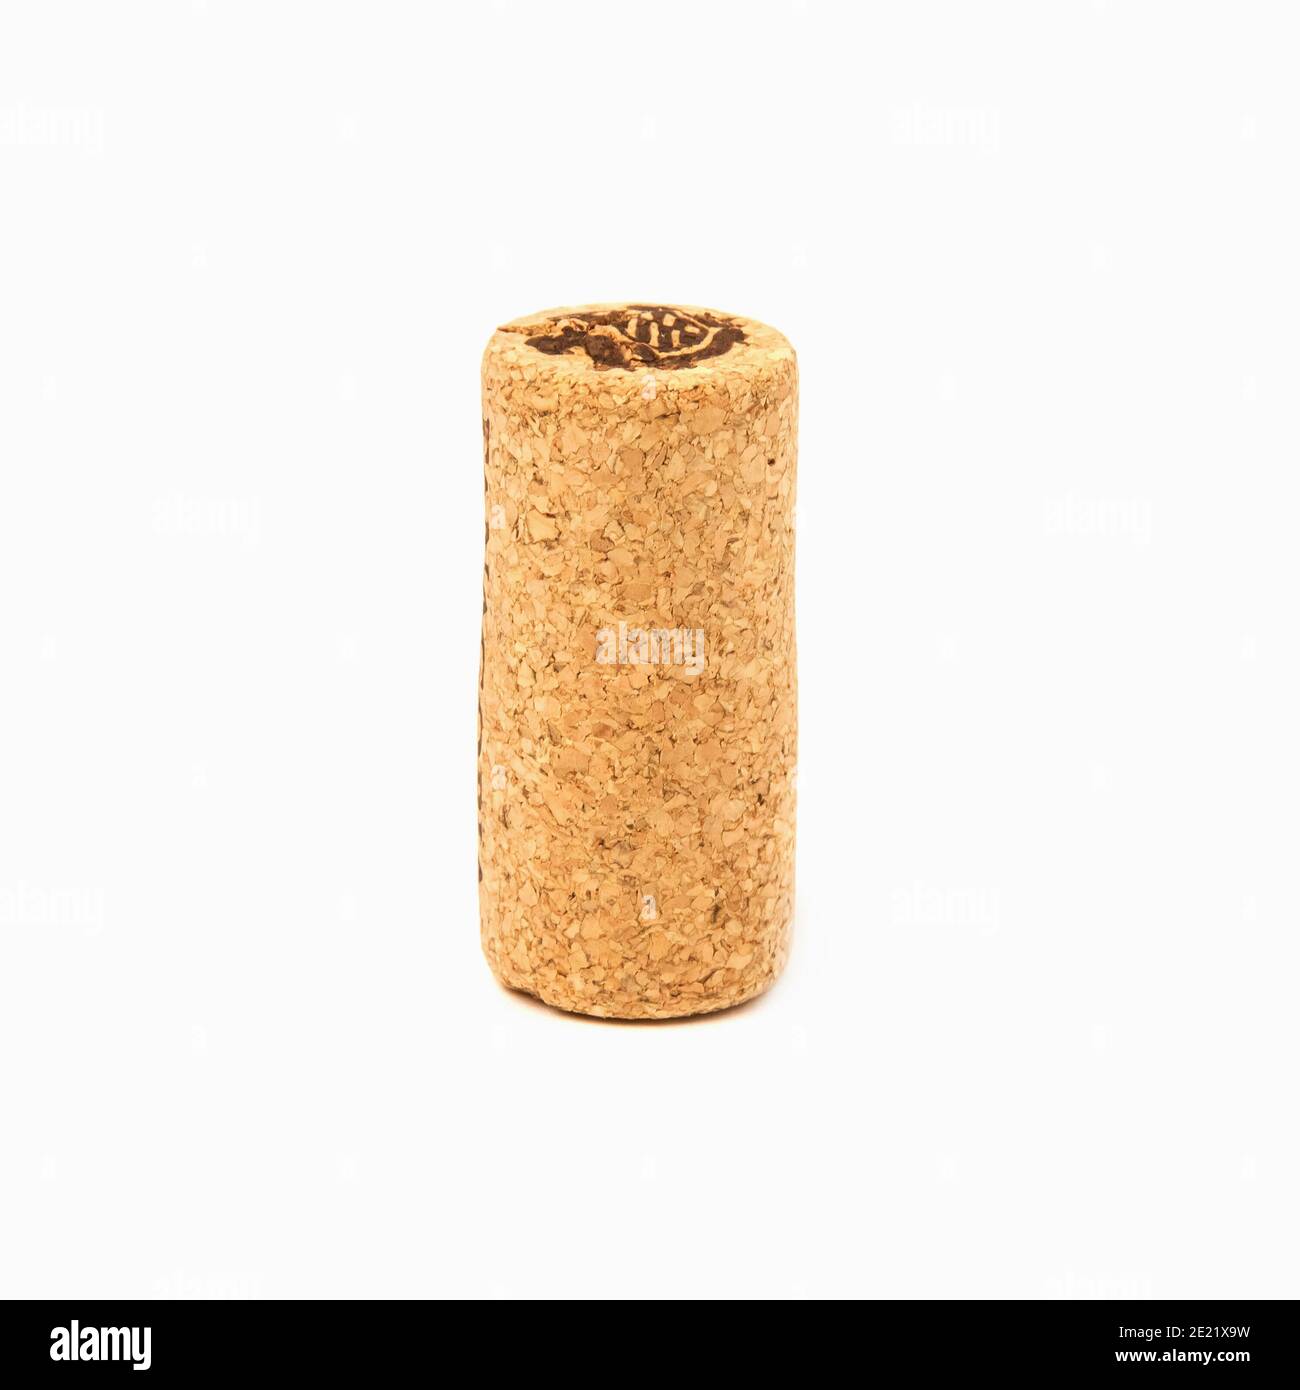 A beige natural cork from a wine bottle isolated on white background Stock Photo